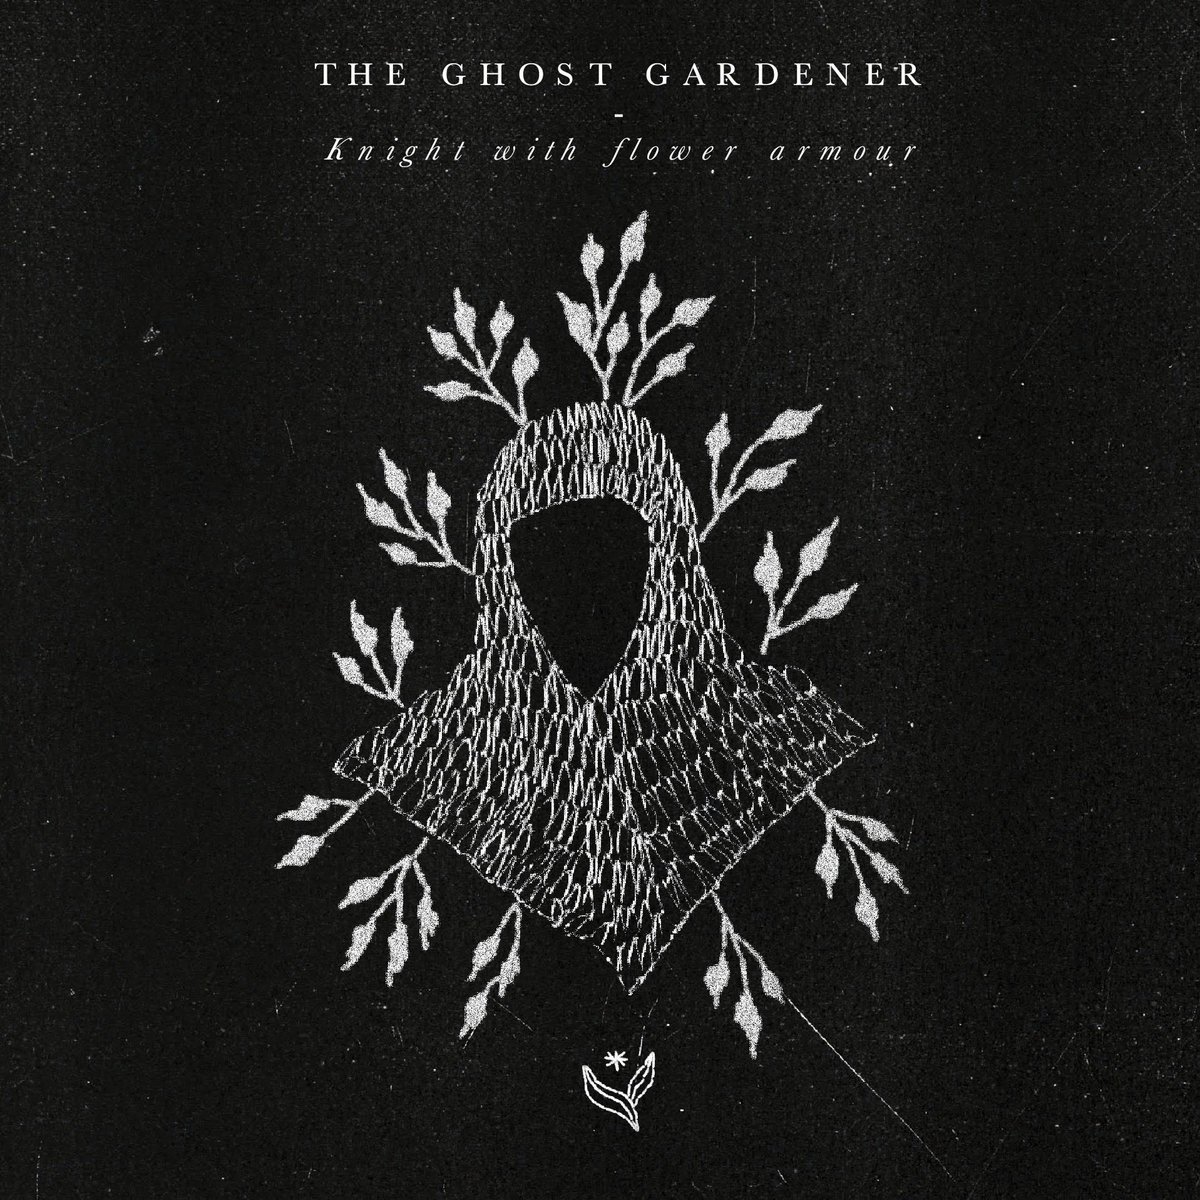 The Ghost Gardener - Knight with Flower Armour (2021) 24bit FLAC Download